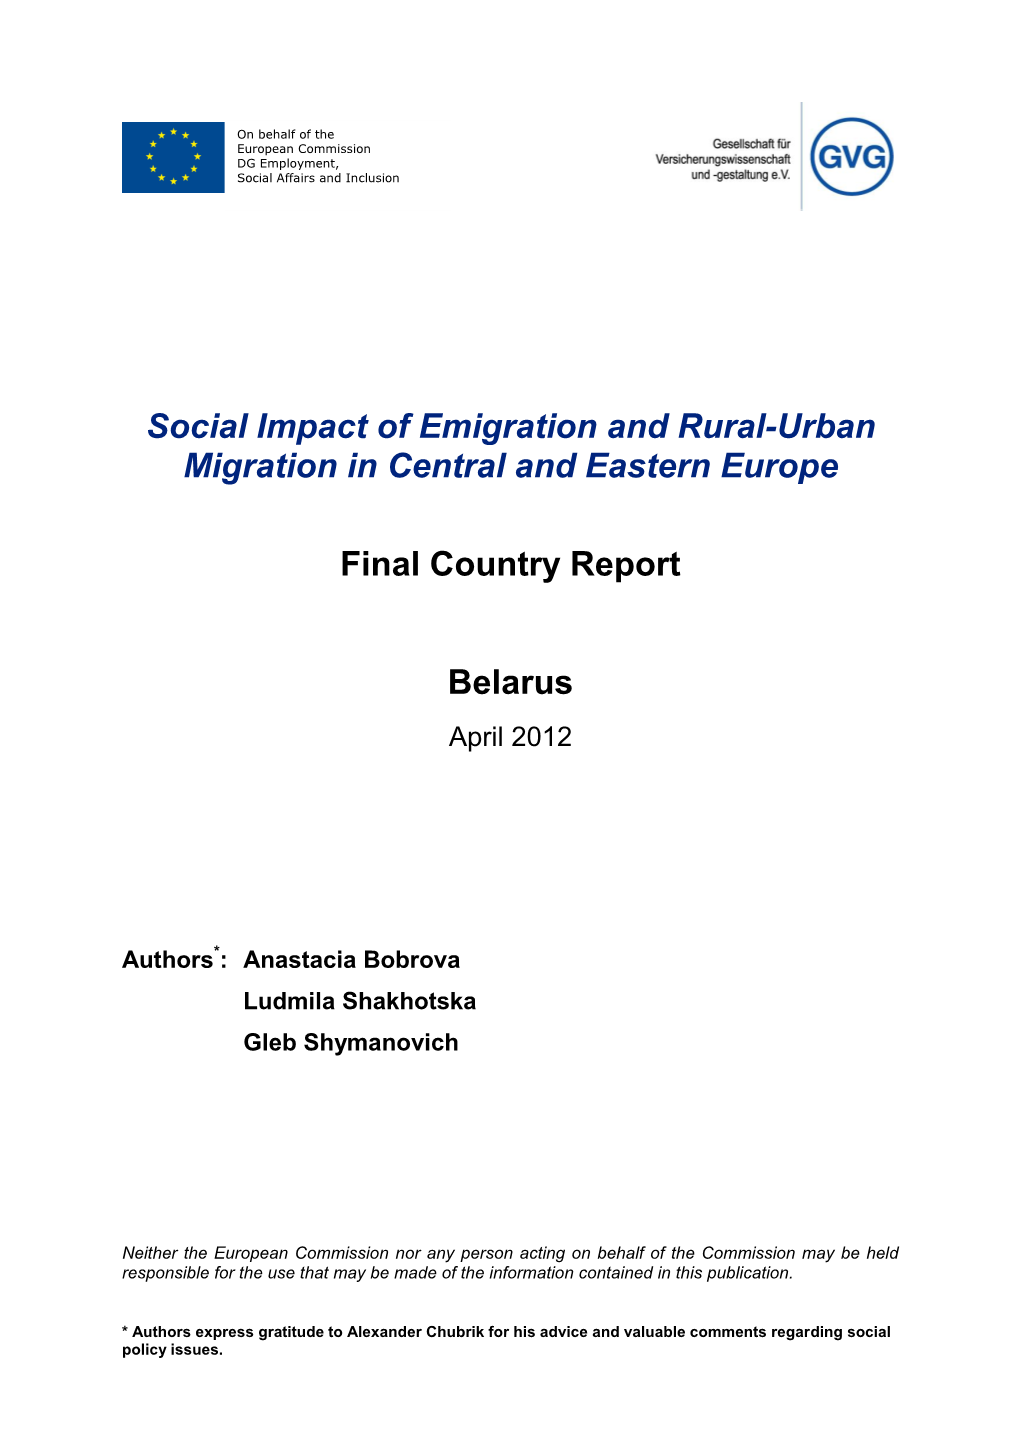 Belarus Country Report: Social Impact of Emigration and Rural-Urban